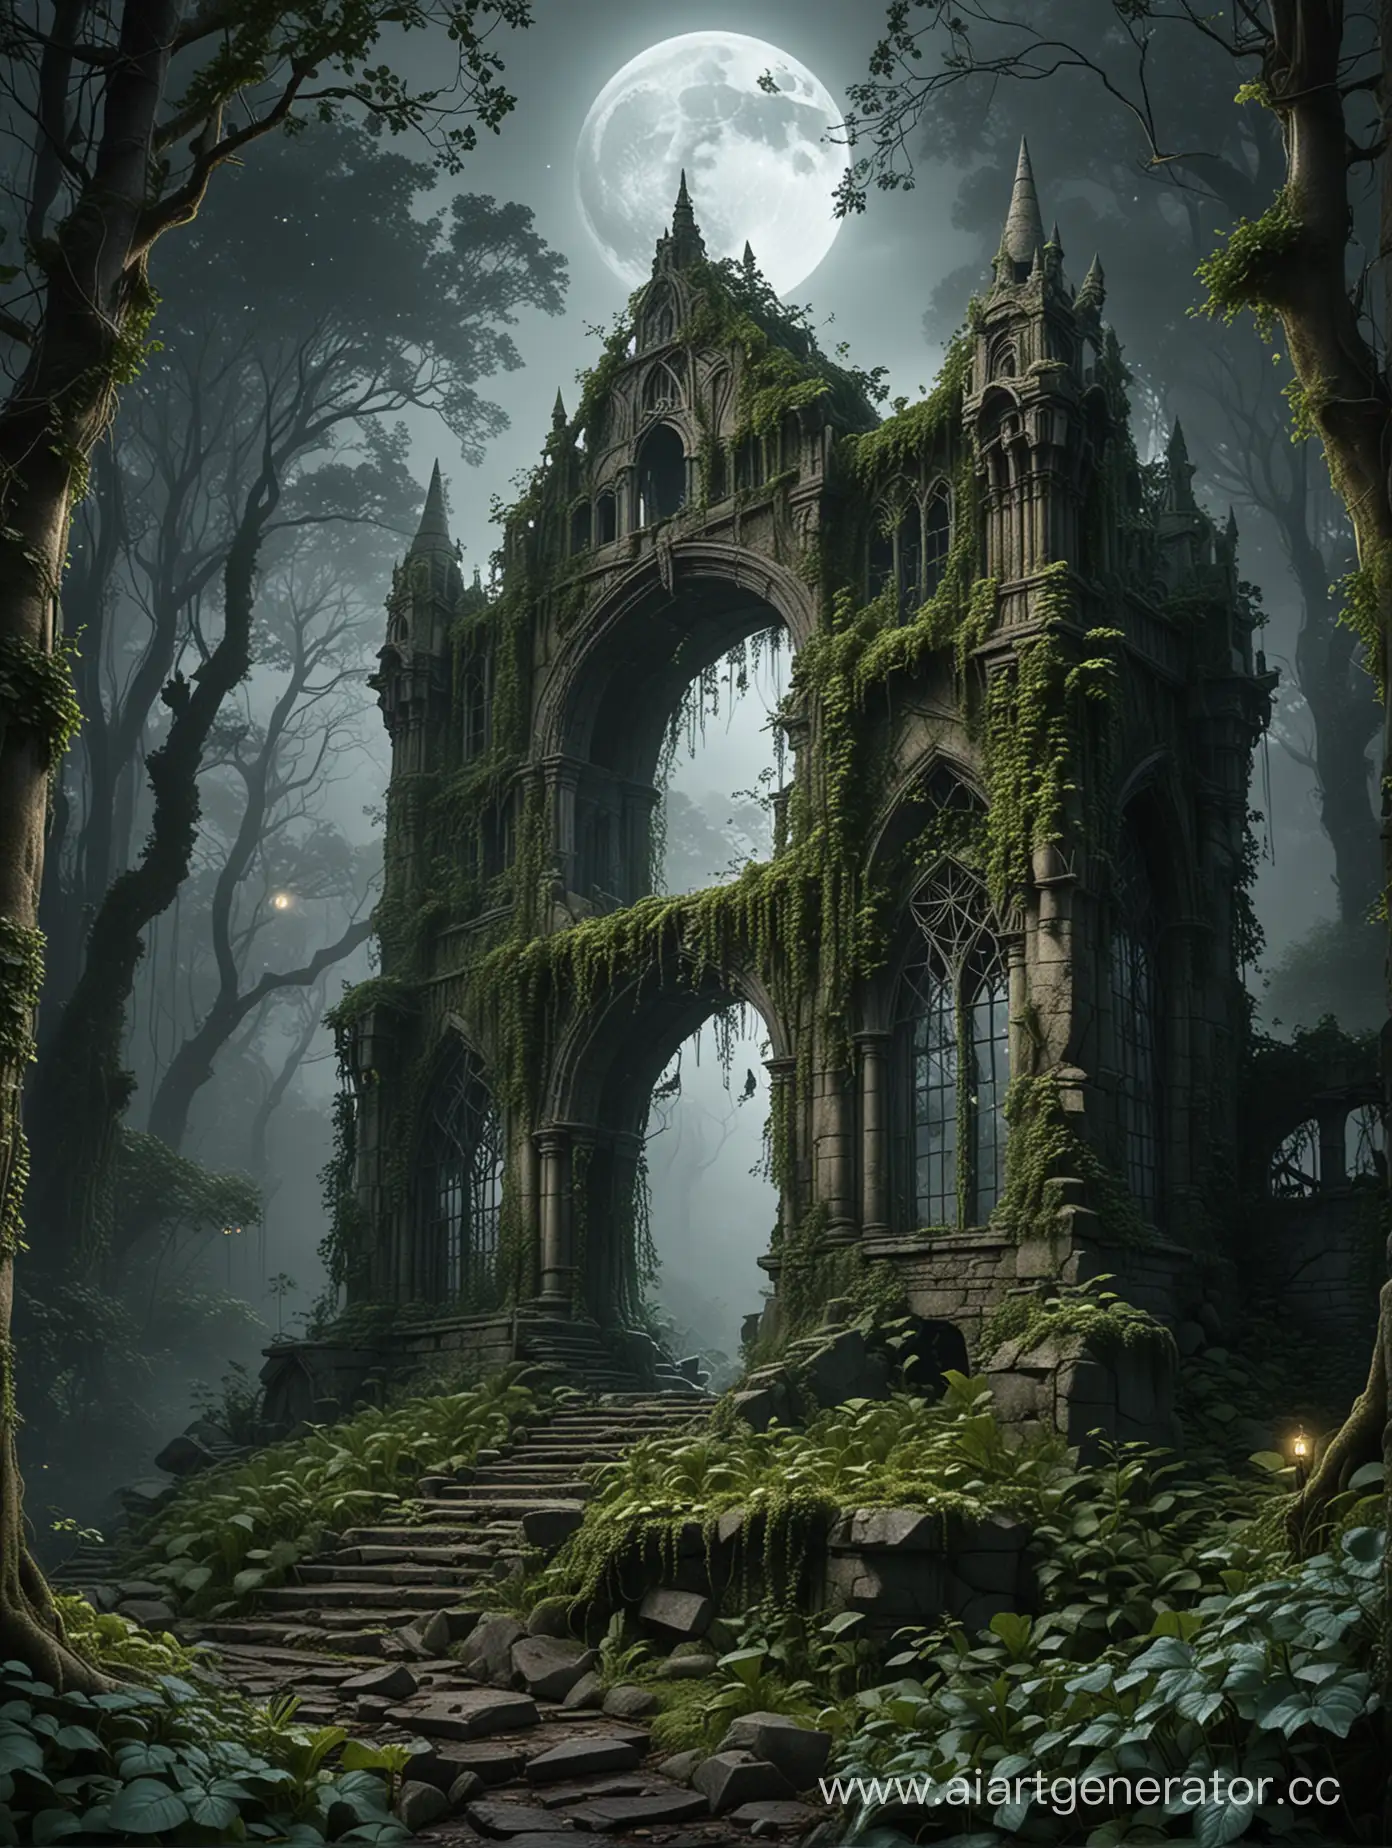 The ruins of an ancient elven palace, lost among the gloomy forest illuminated by the moon. They are entwined with ivy and moss